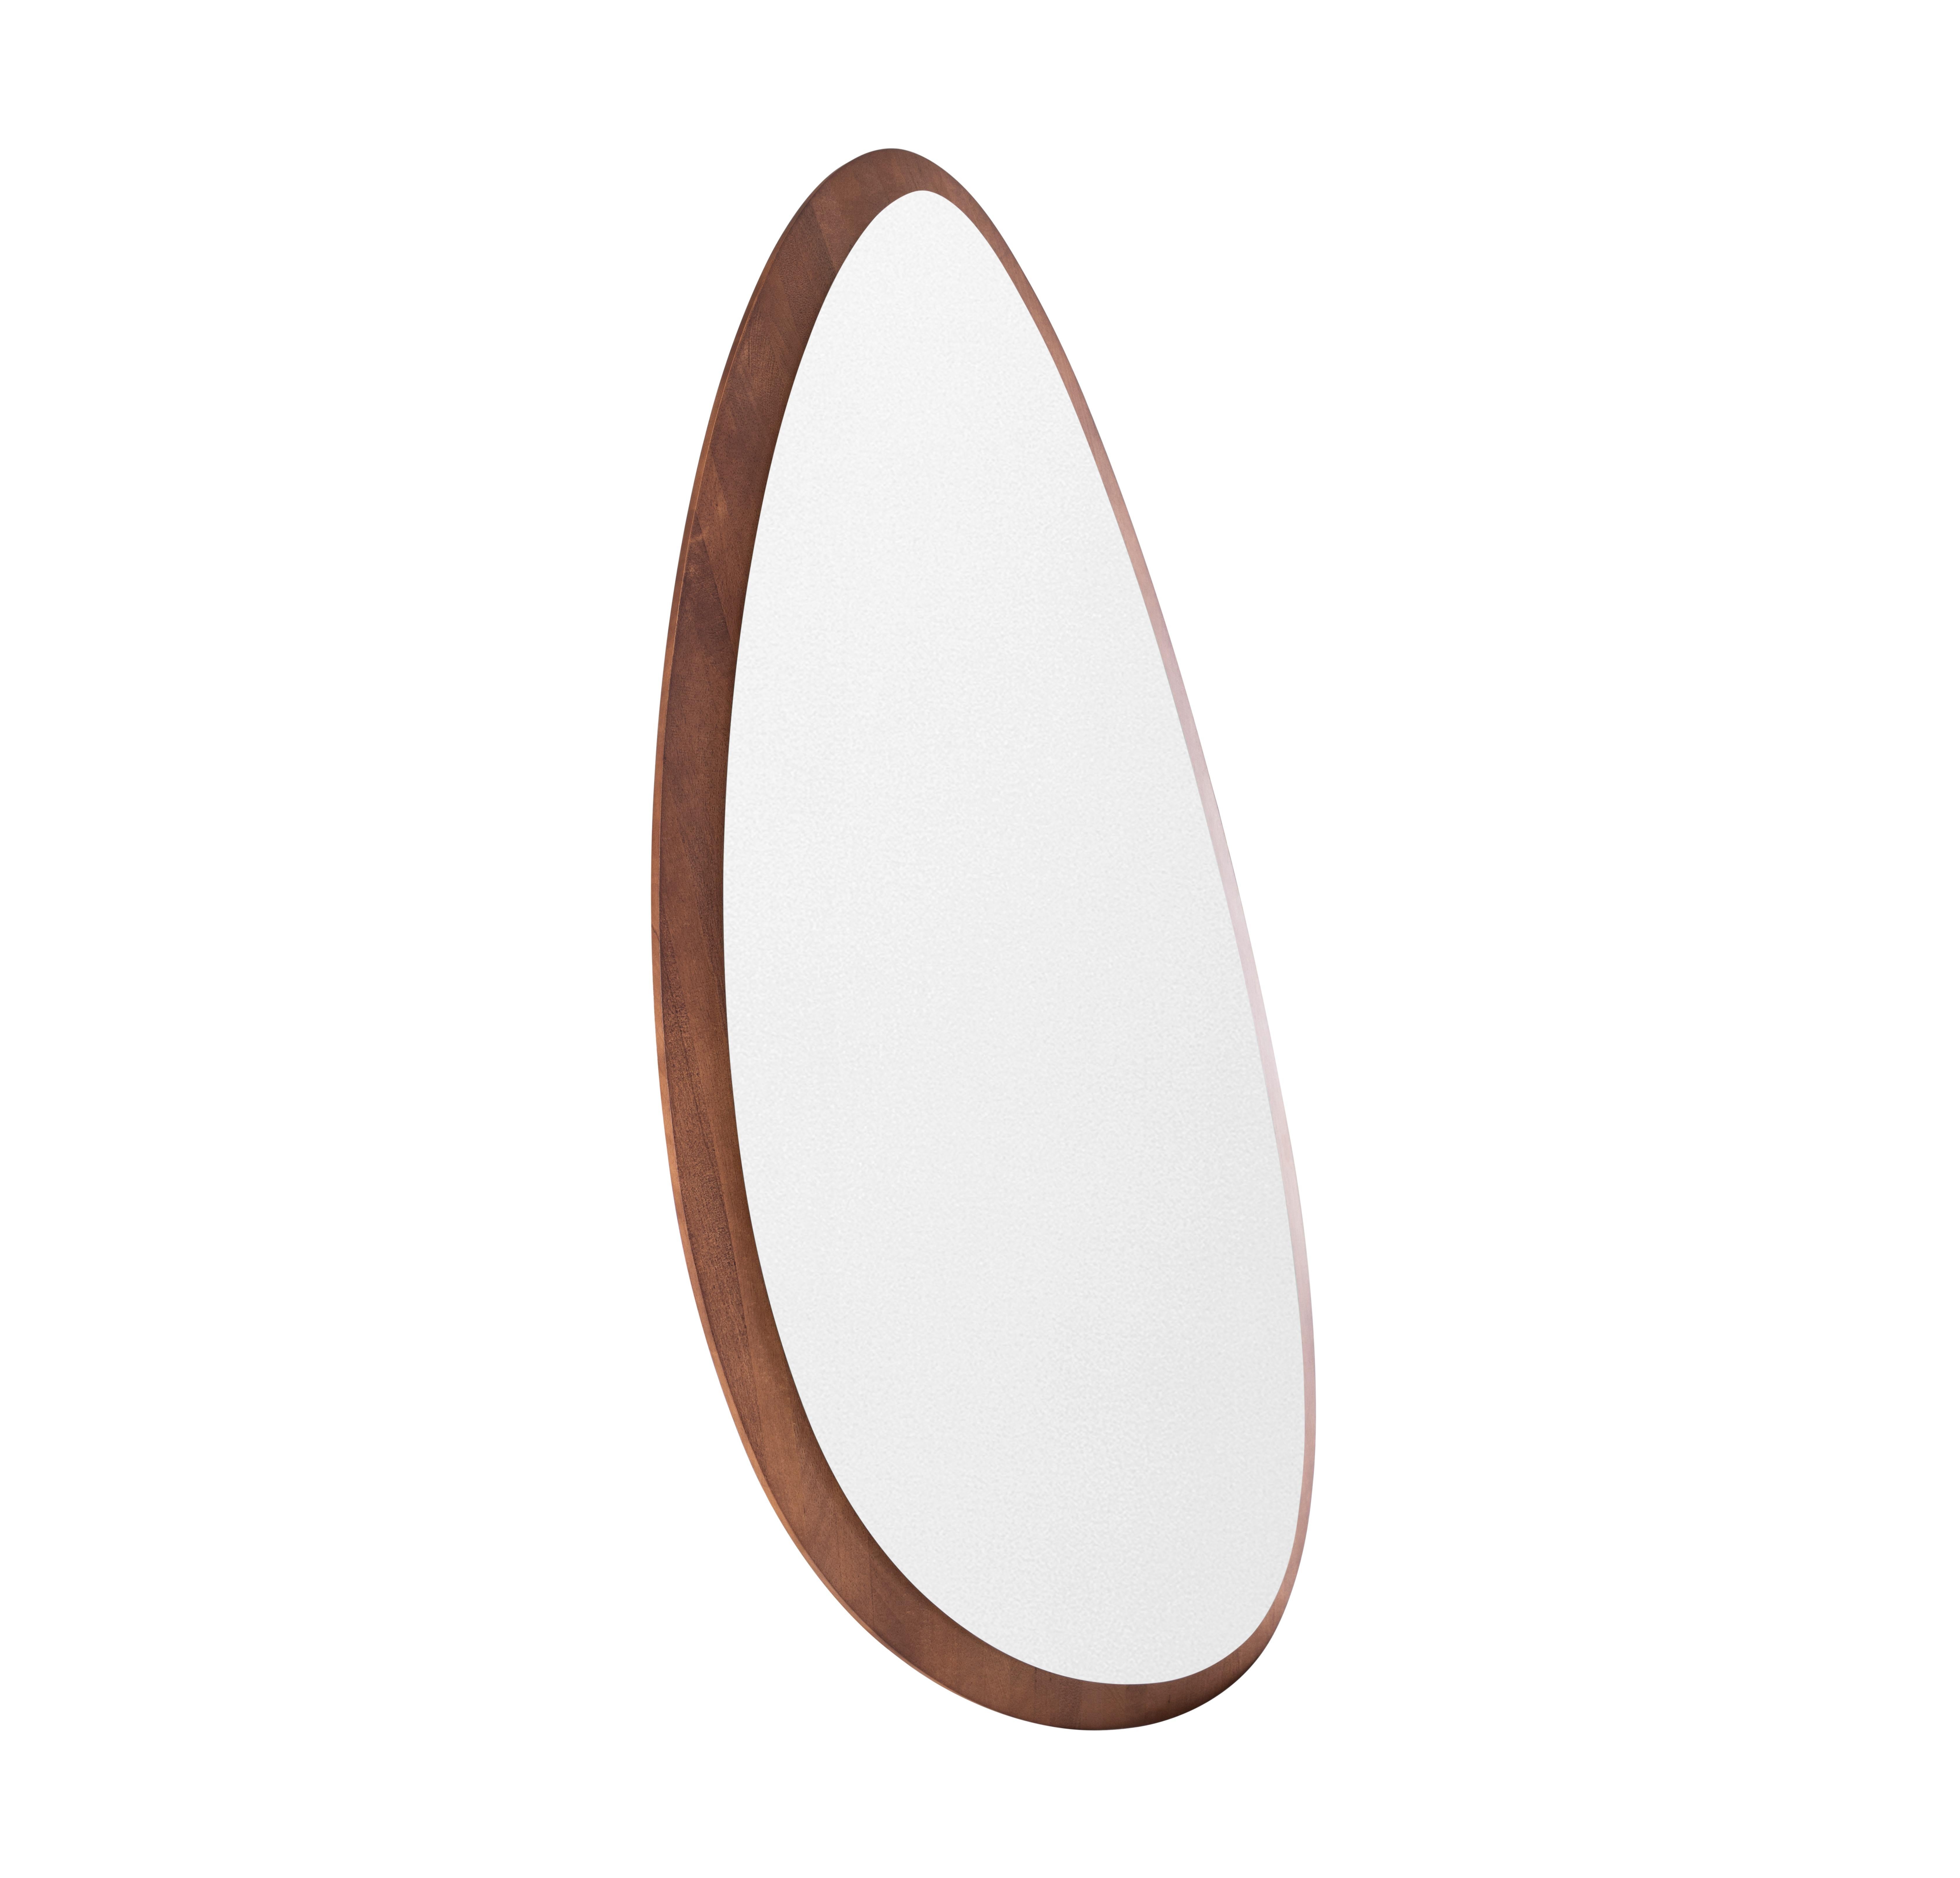 Pante Mirror in Walnut Wood Finish, Set of 4 For Sale 2